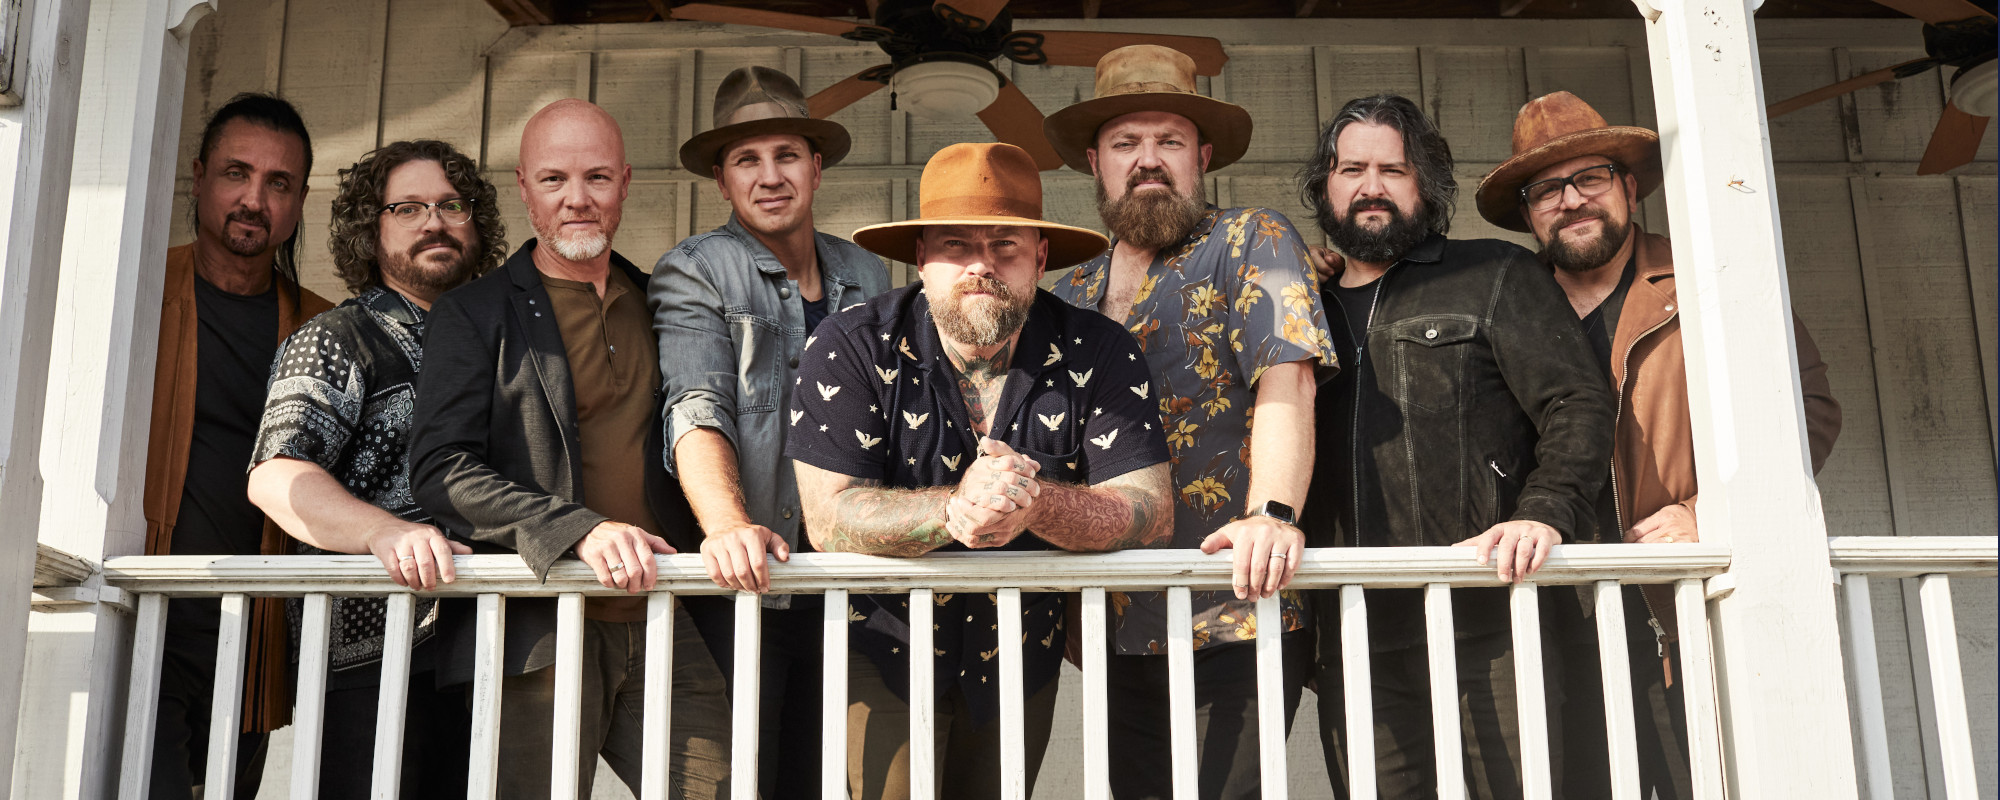 Zac Brown Shares New Track “Wild Palomino” from Forthcoming Deluxe Album ‘The Comeback (Deluxe)’